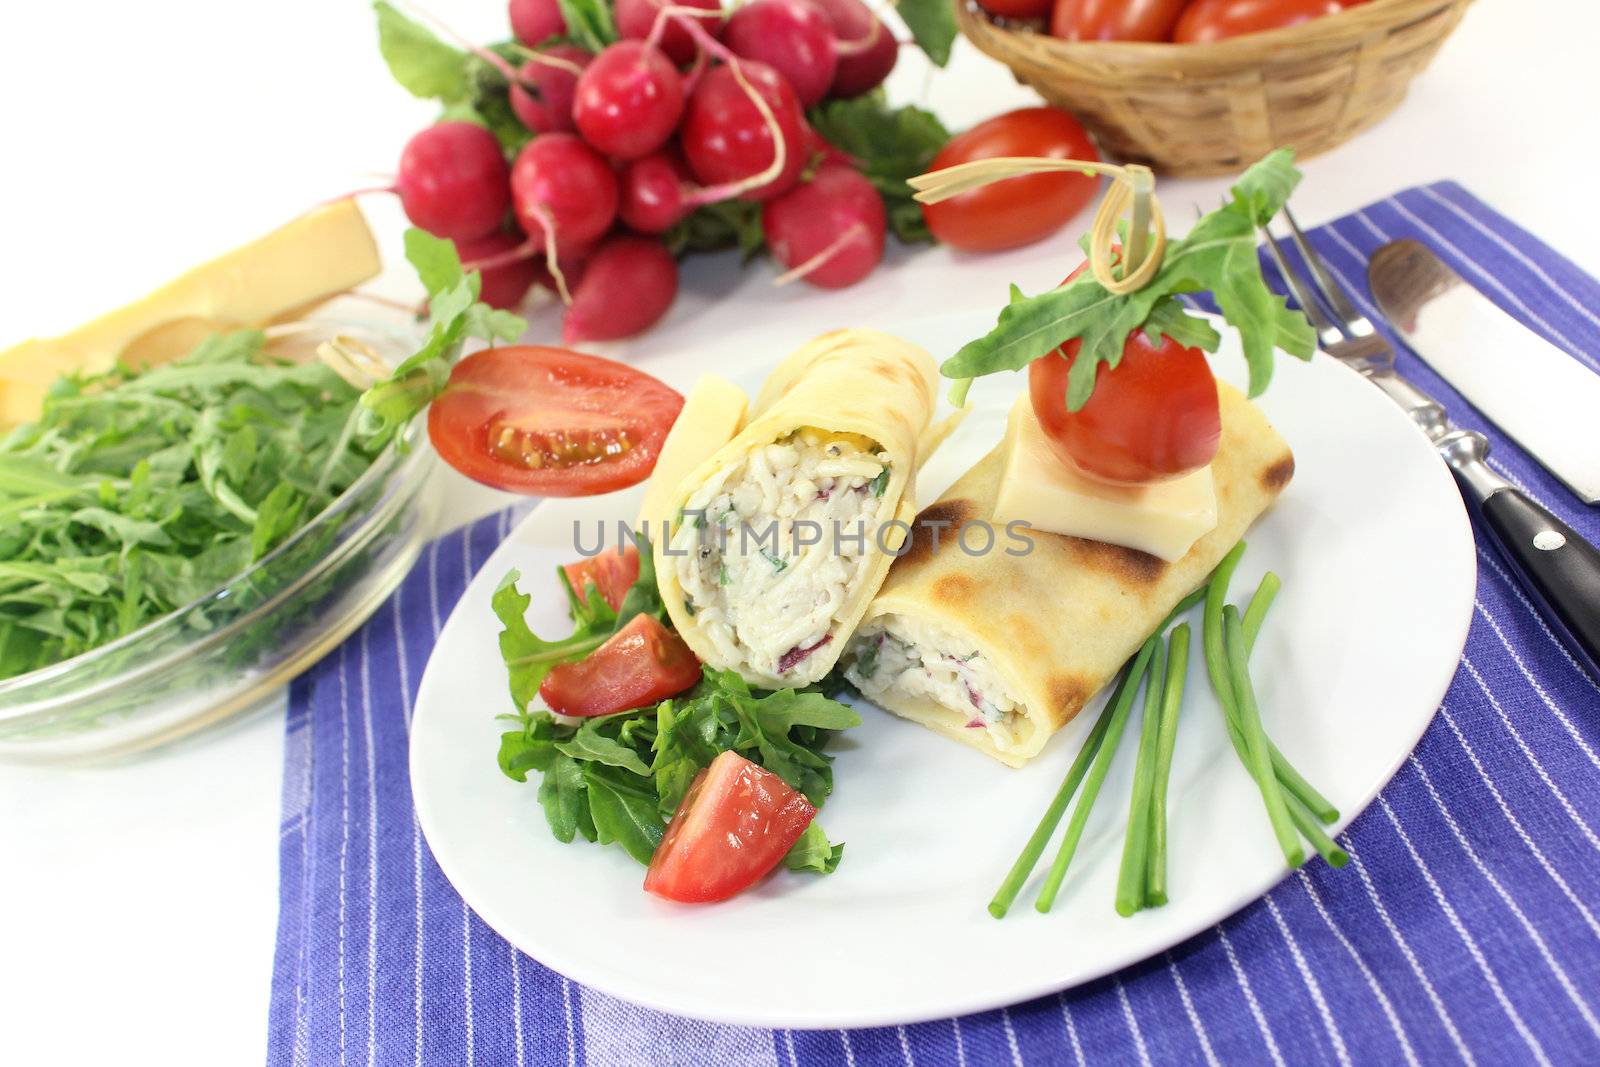 Cheese crepe rolls by silencefoto